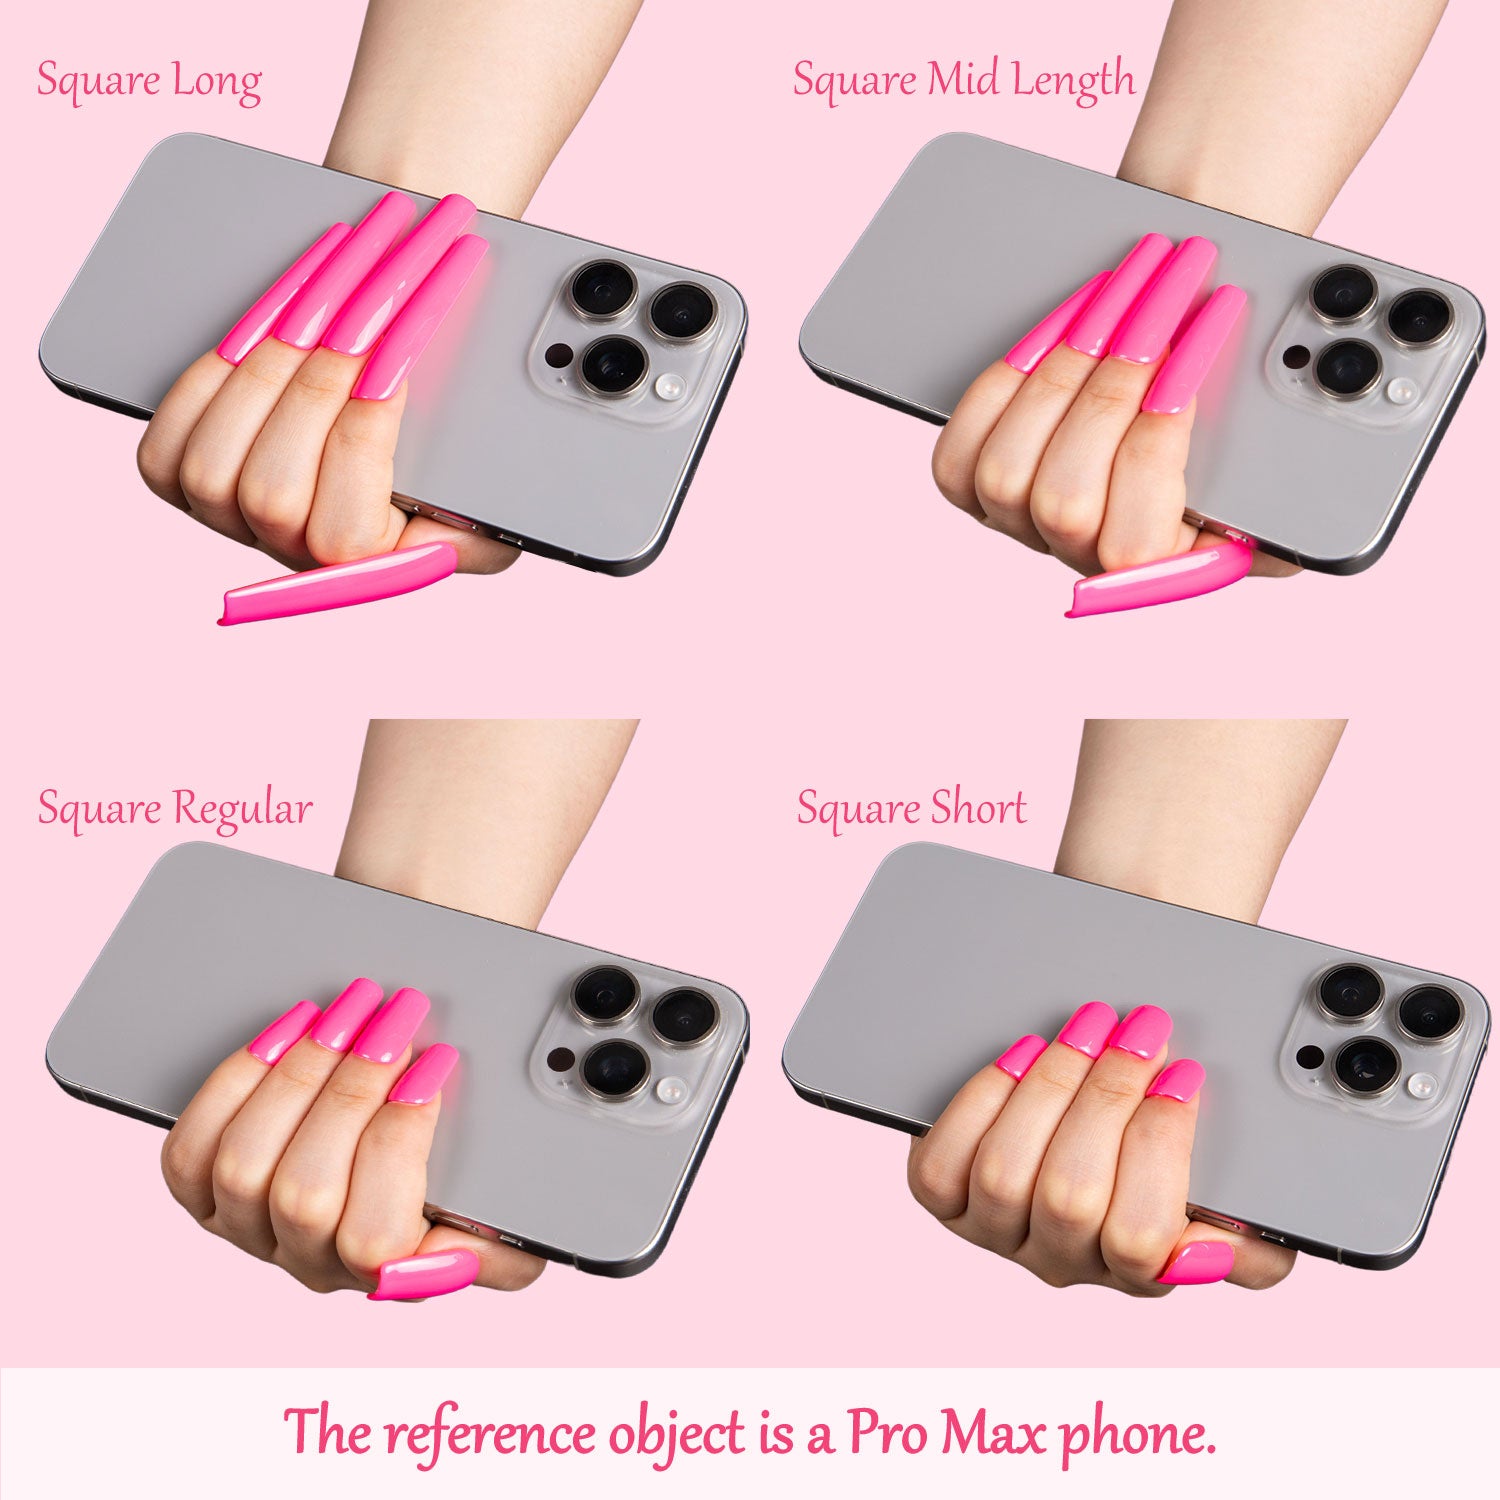 Hand holding Pro Max phone wearing bright pink press-on nails in square long, mid-length, regular, and short shapes.